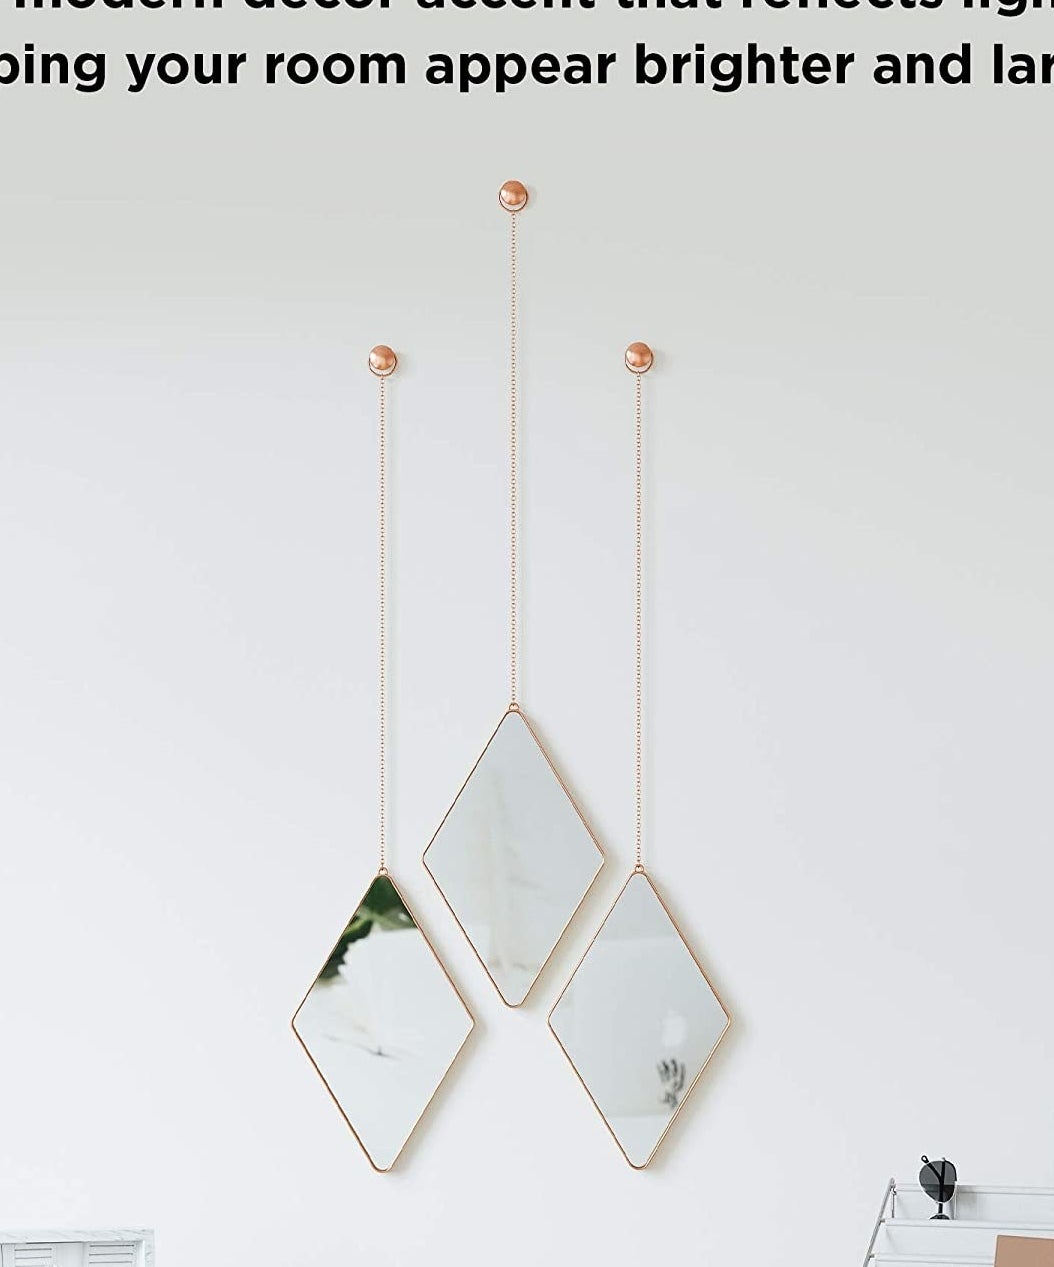 three diamond shaped mirrors hanging from dainty chains on a wall 